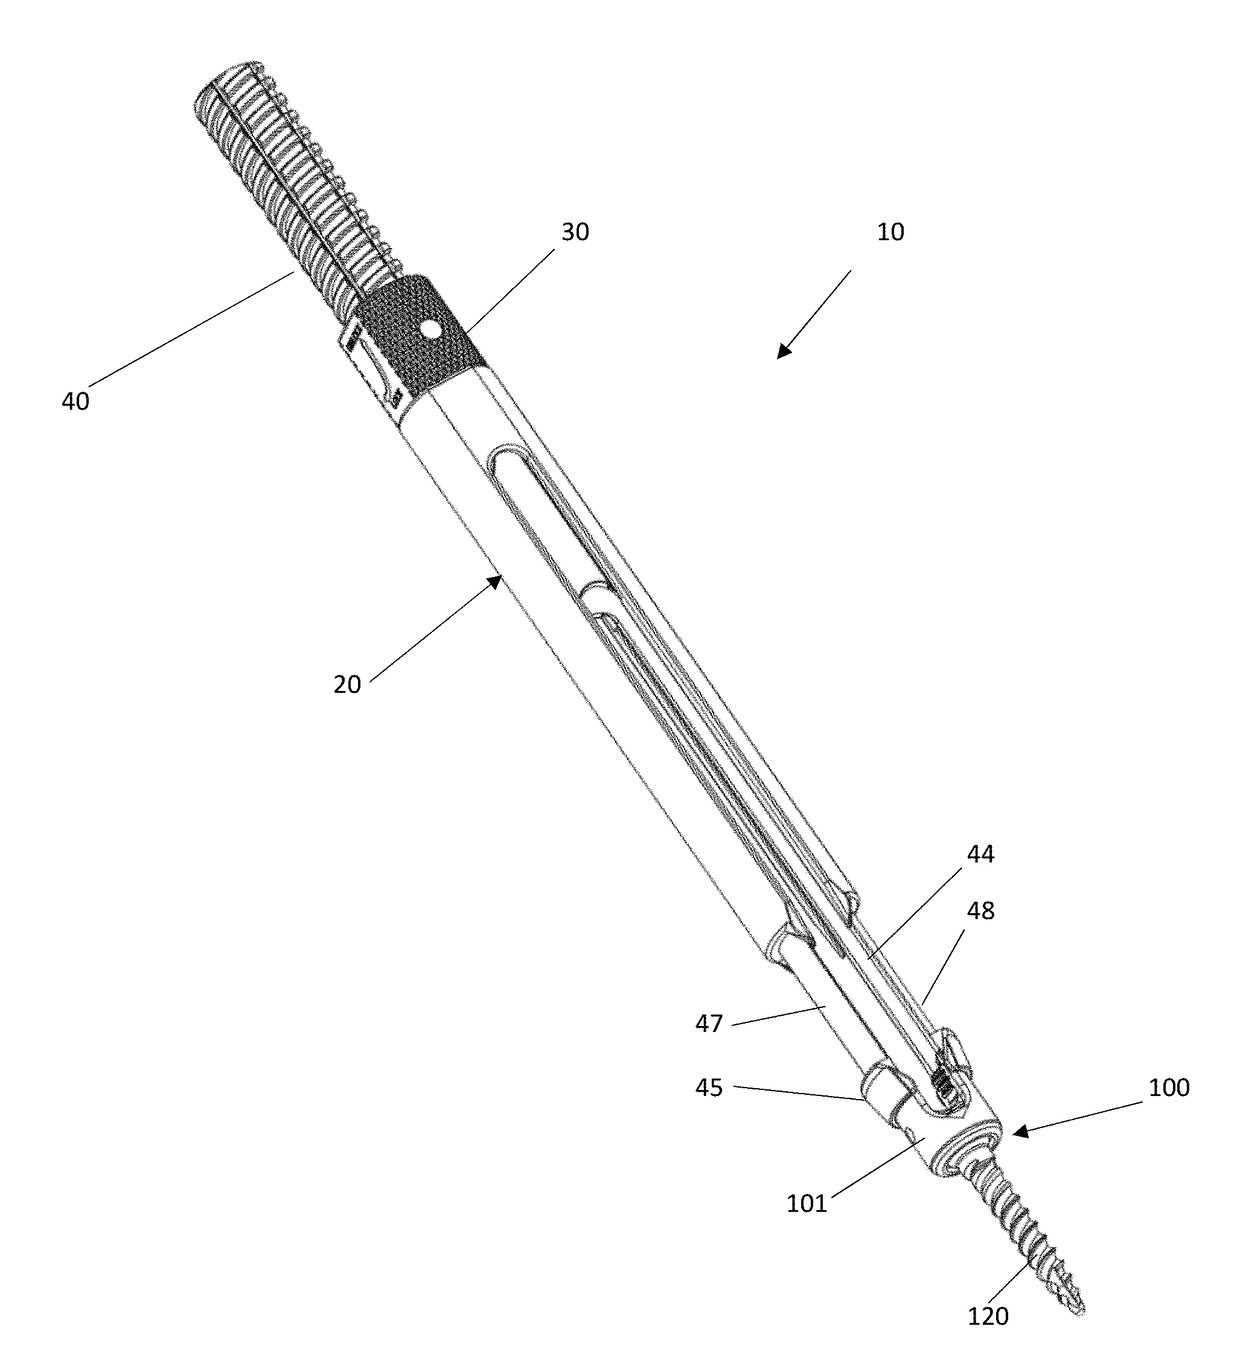 Minimally invasive screw extension assembly